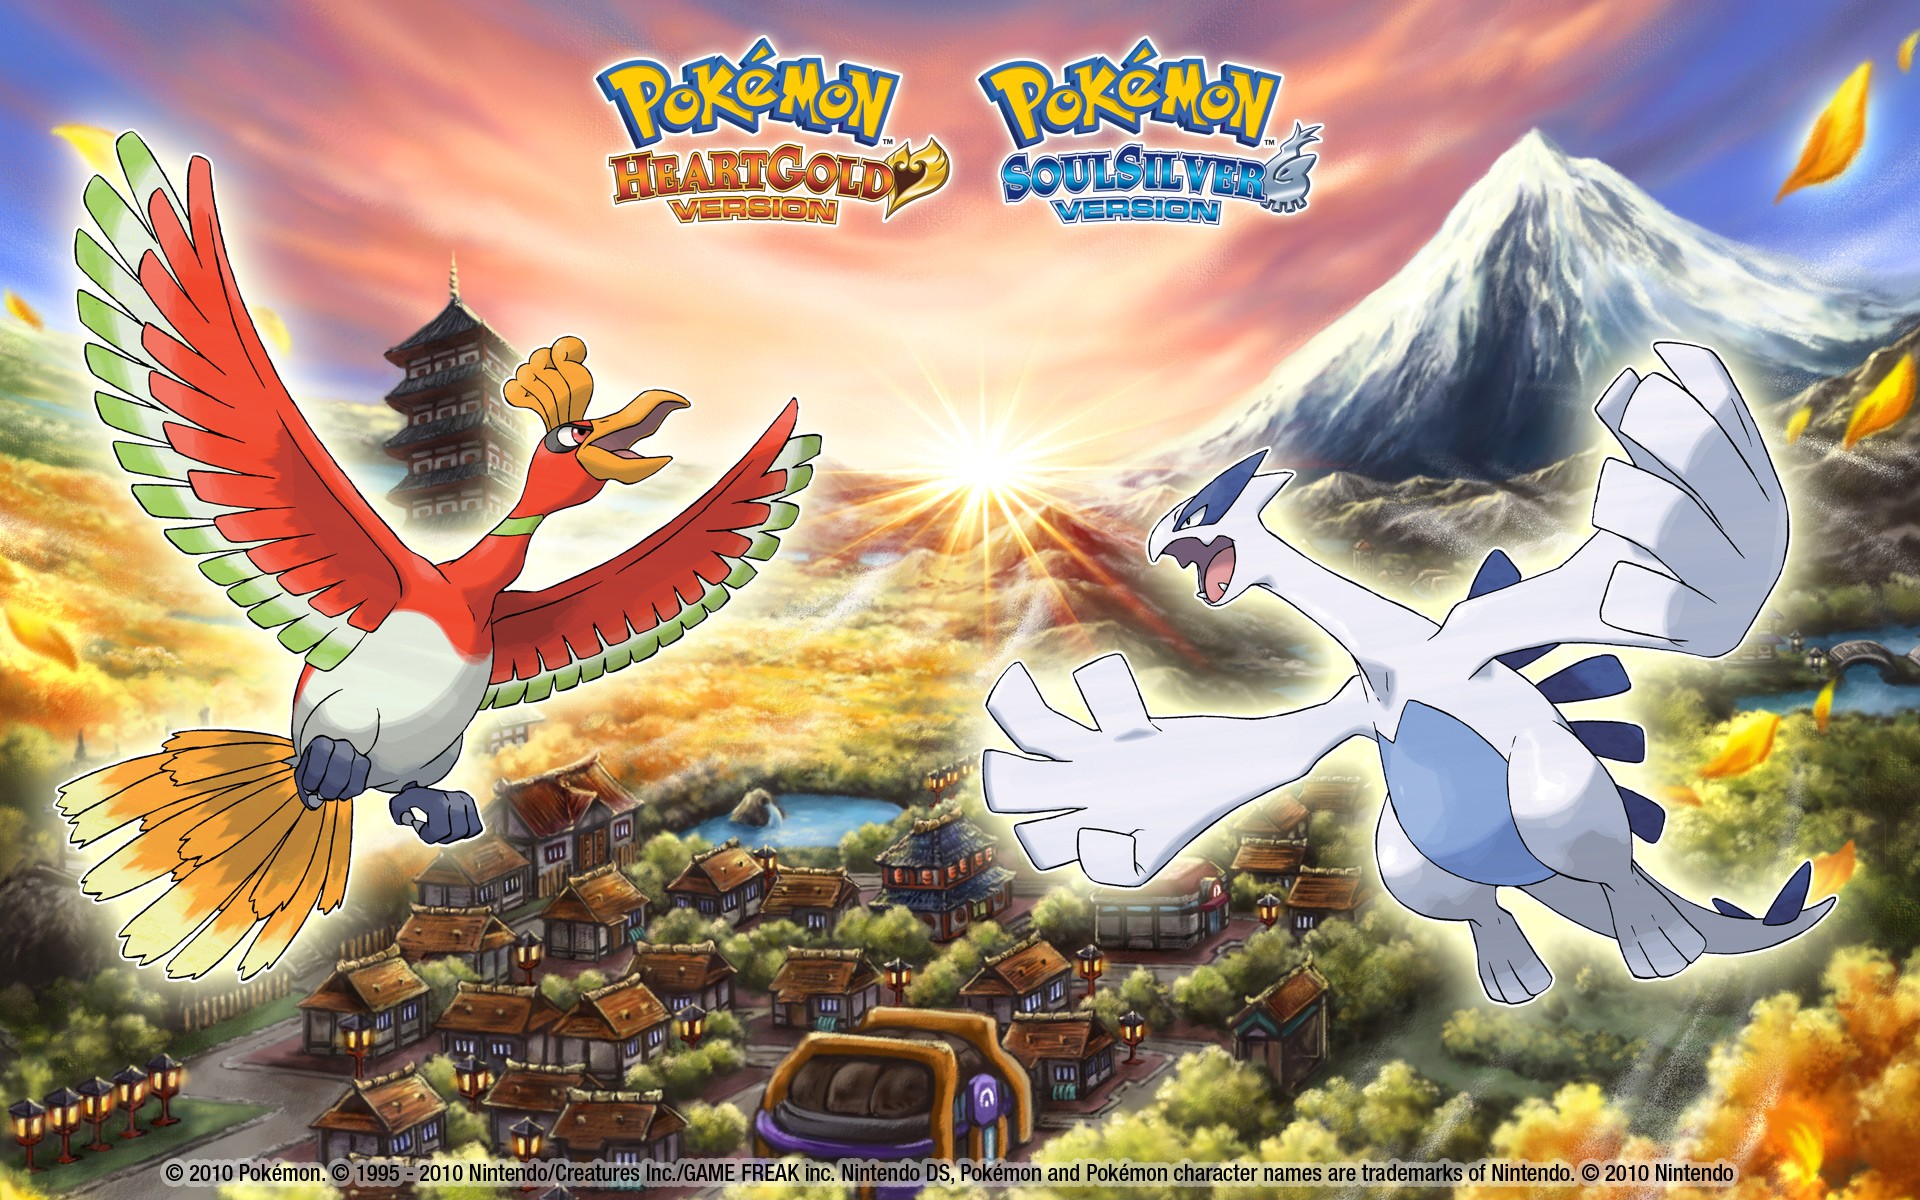 Video Game Pokémon: HeartGold and SoulSilver HD Wallpaper Background Image.